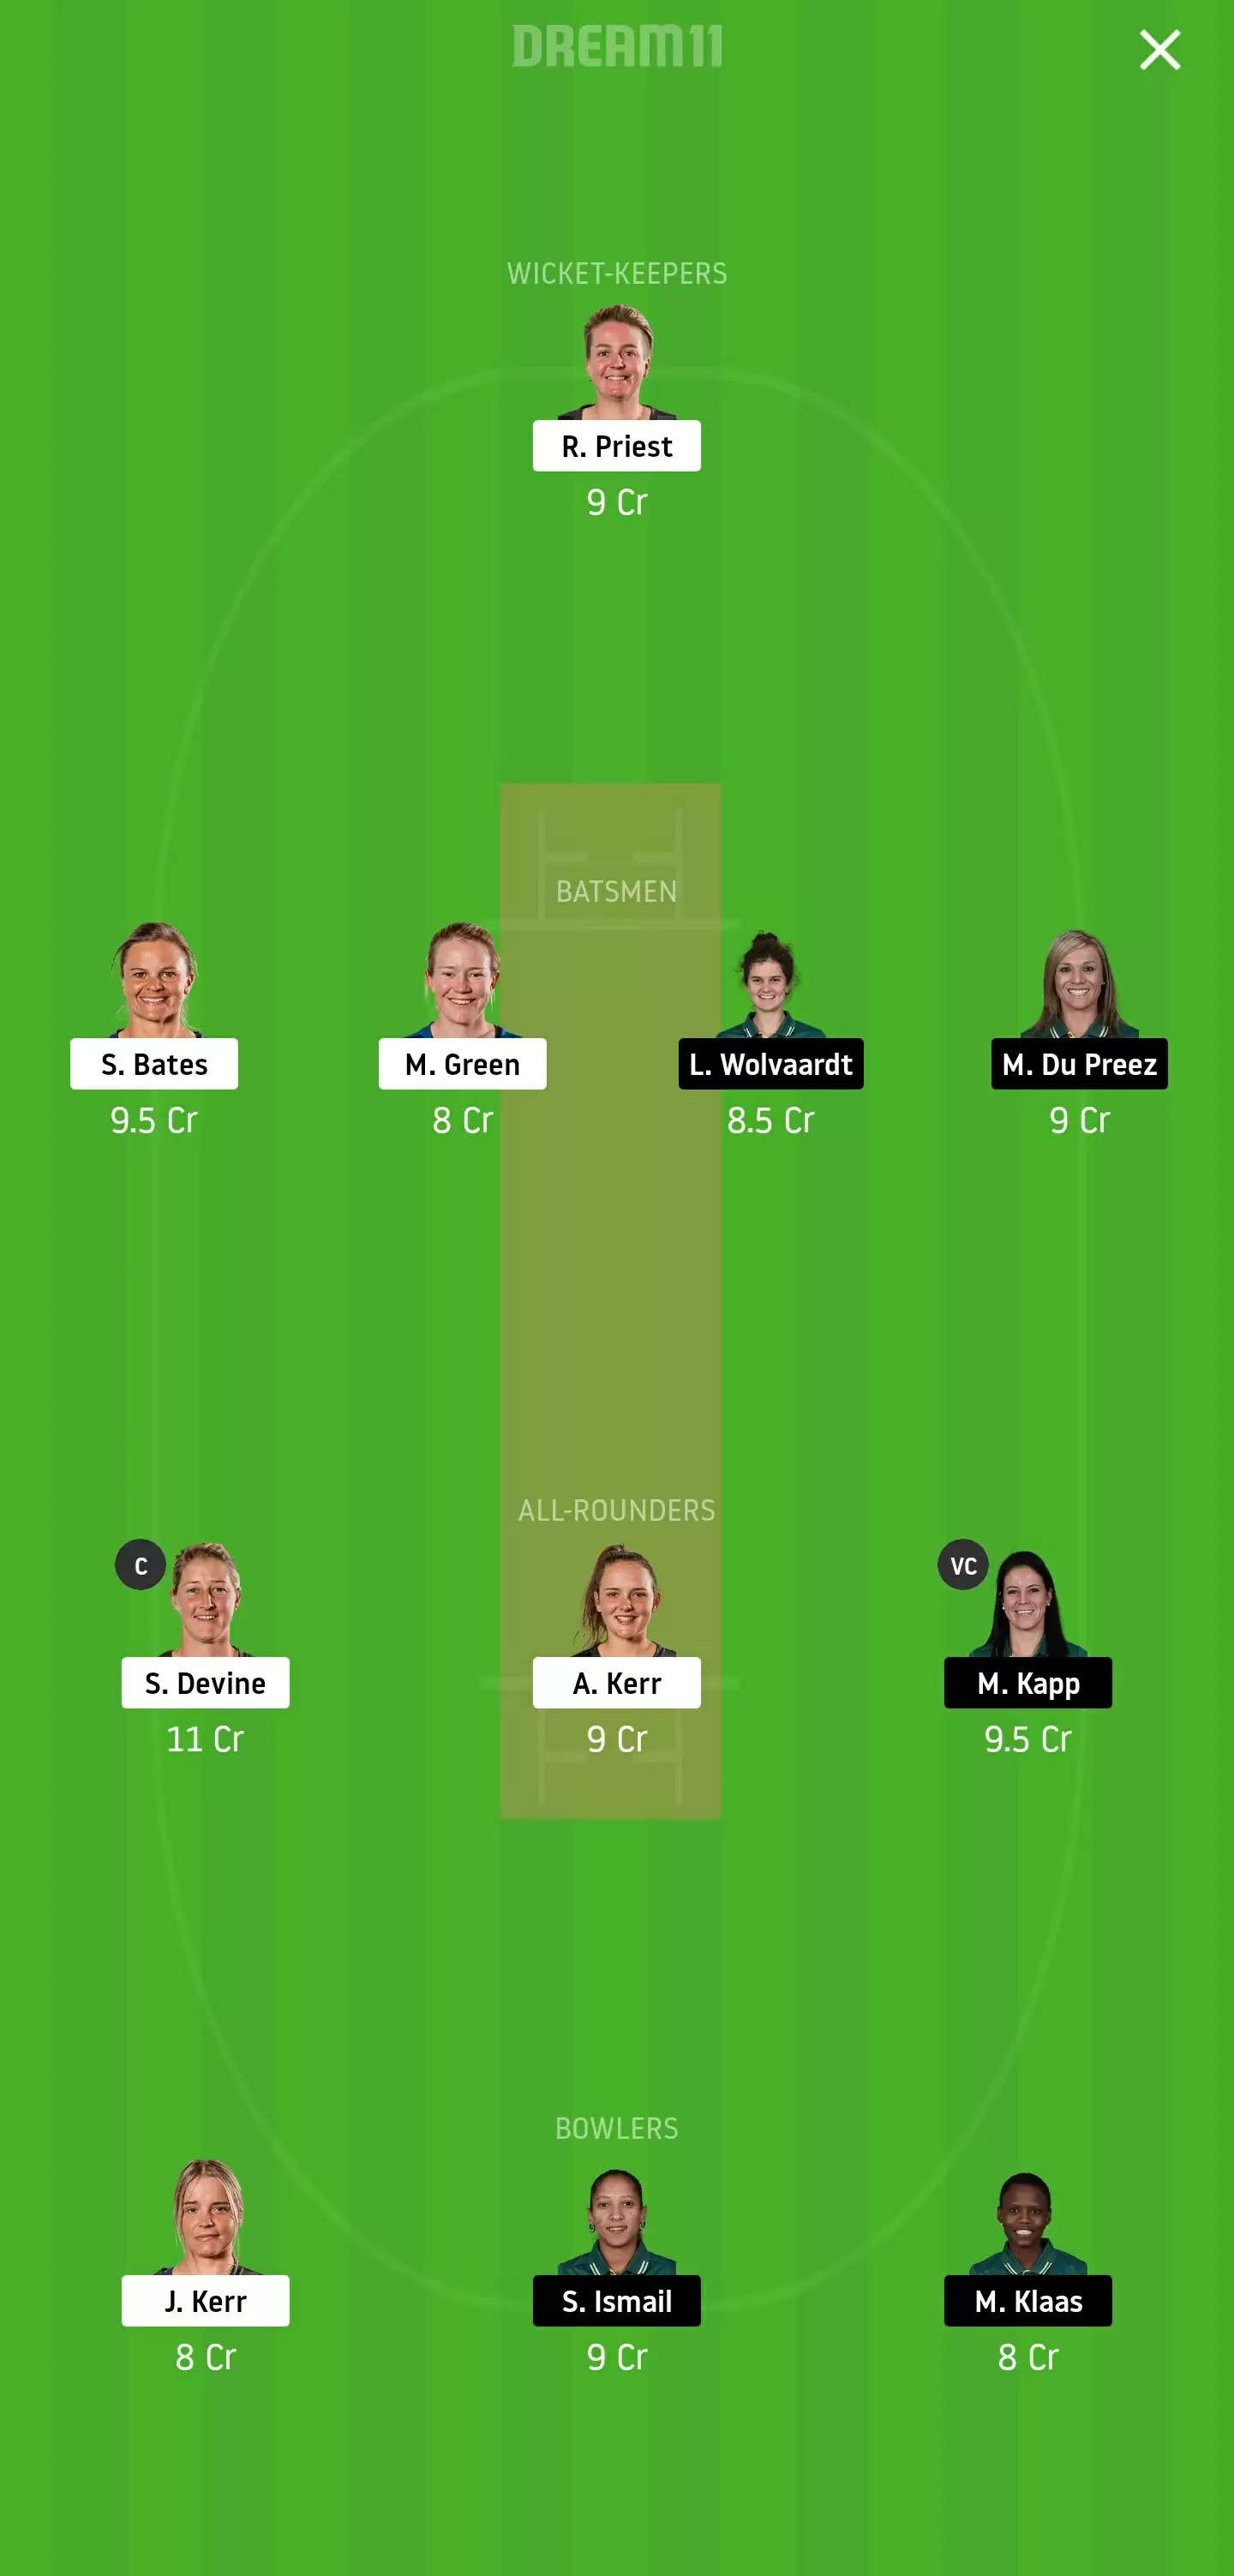 1st T20: NZ-W vs SA-W Dream11 Prediction, Fantasy Cricket Tips, Playing XI, Team, Pitch Report and Weather Conditions